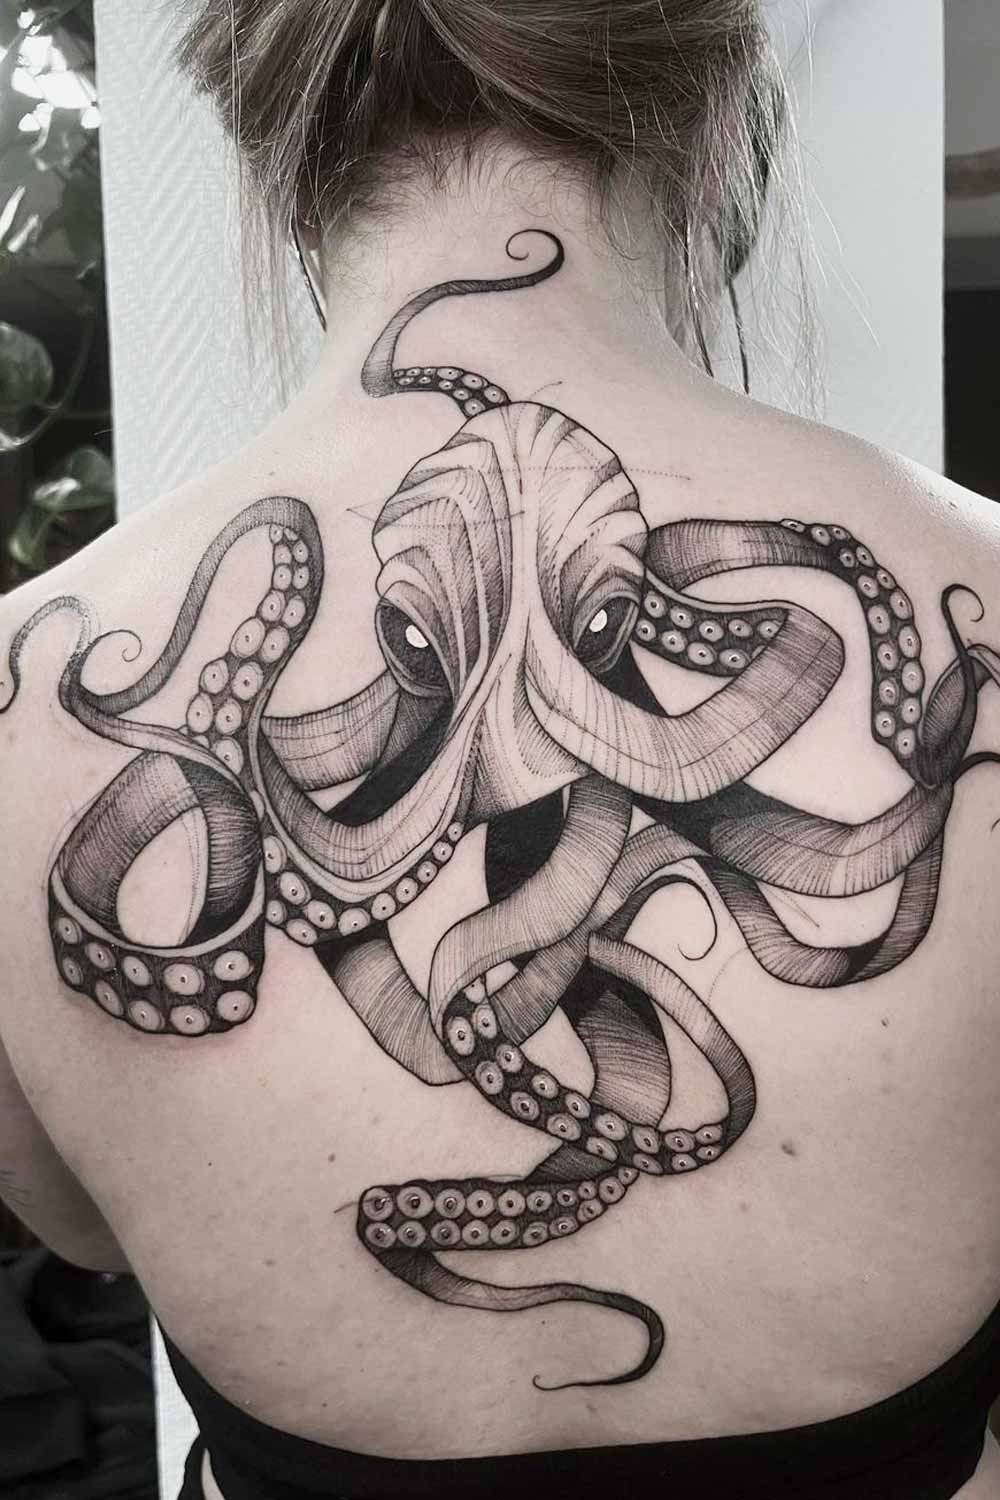 Big Tattoos with Octopus